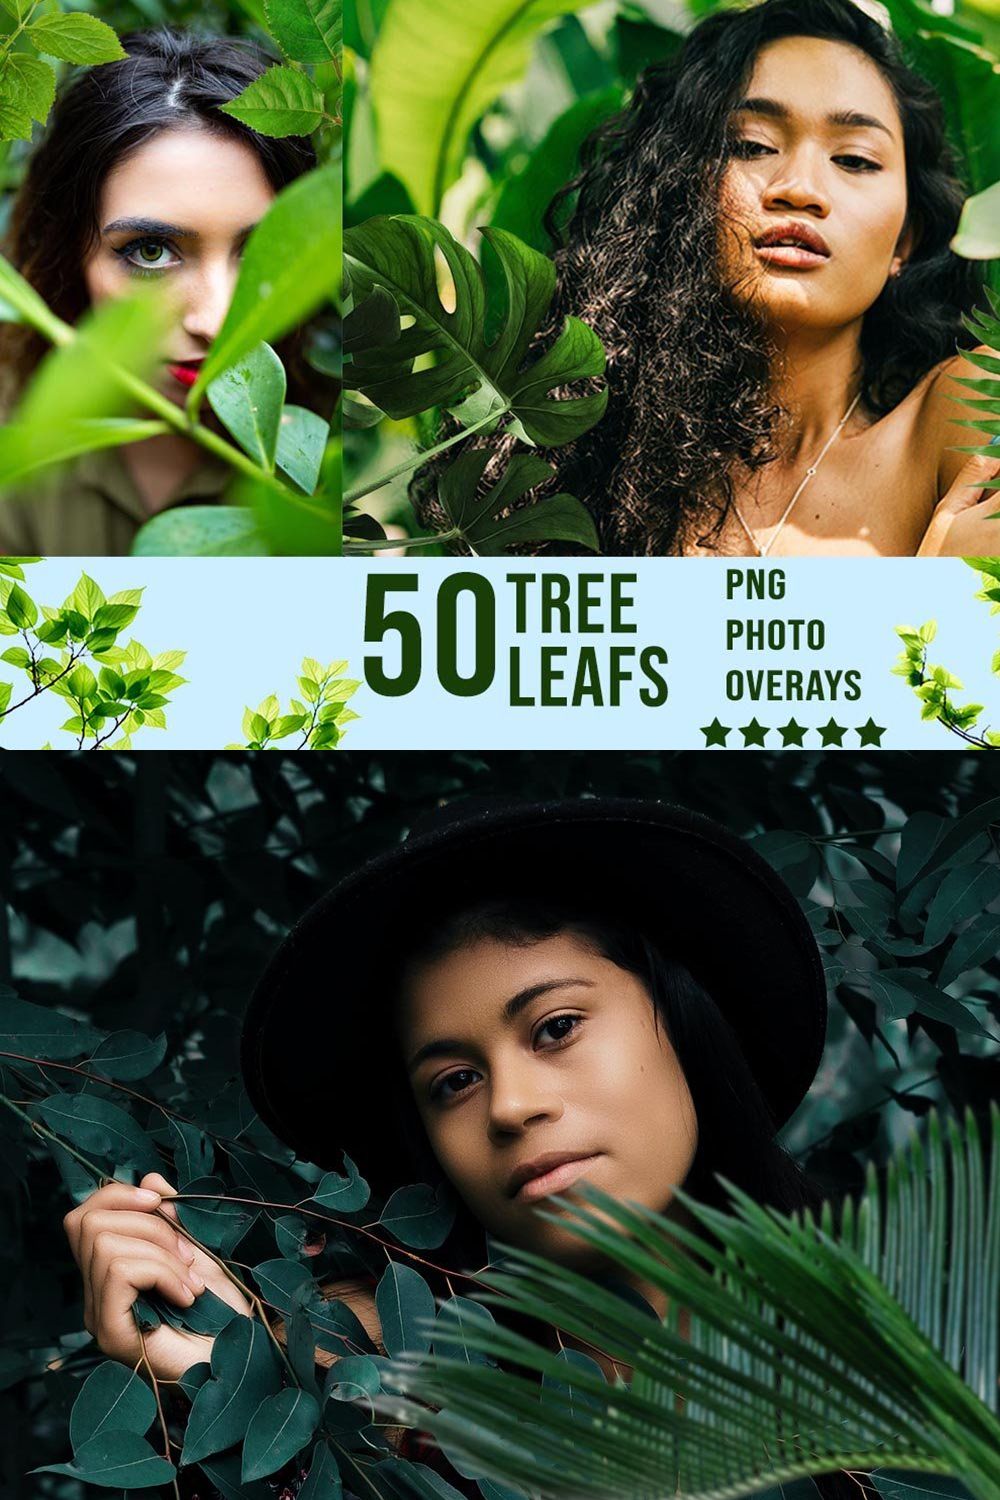 50 Tree leafs Photo Overlay PNG pinterest preview image.